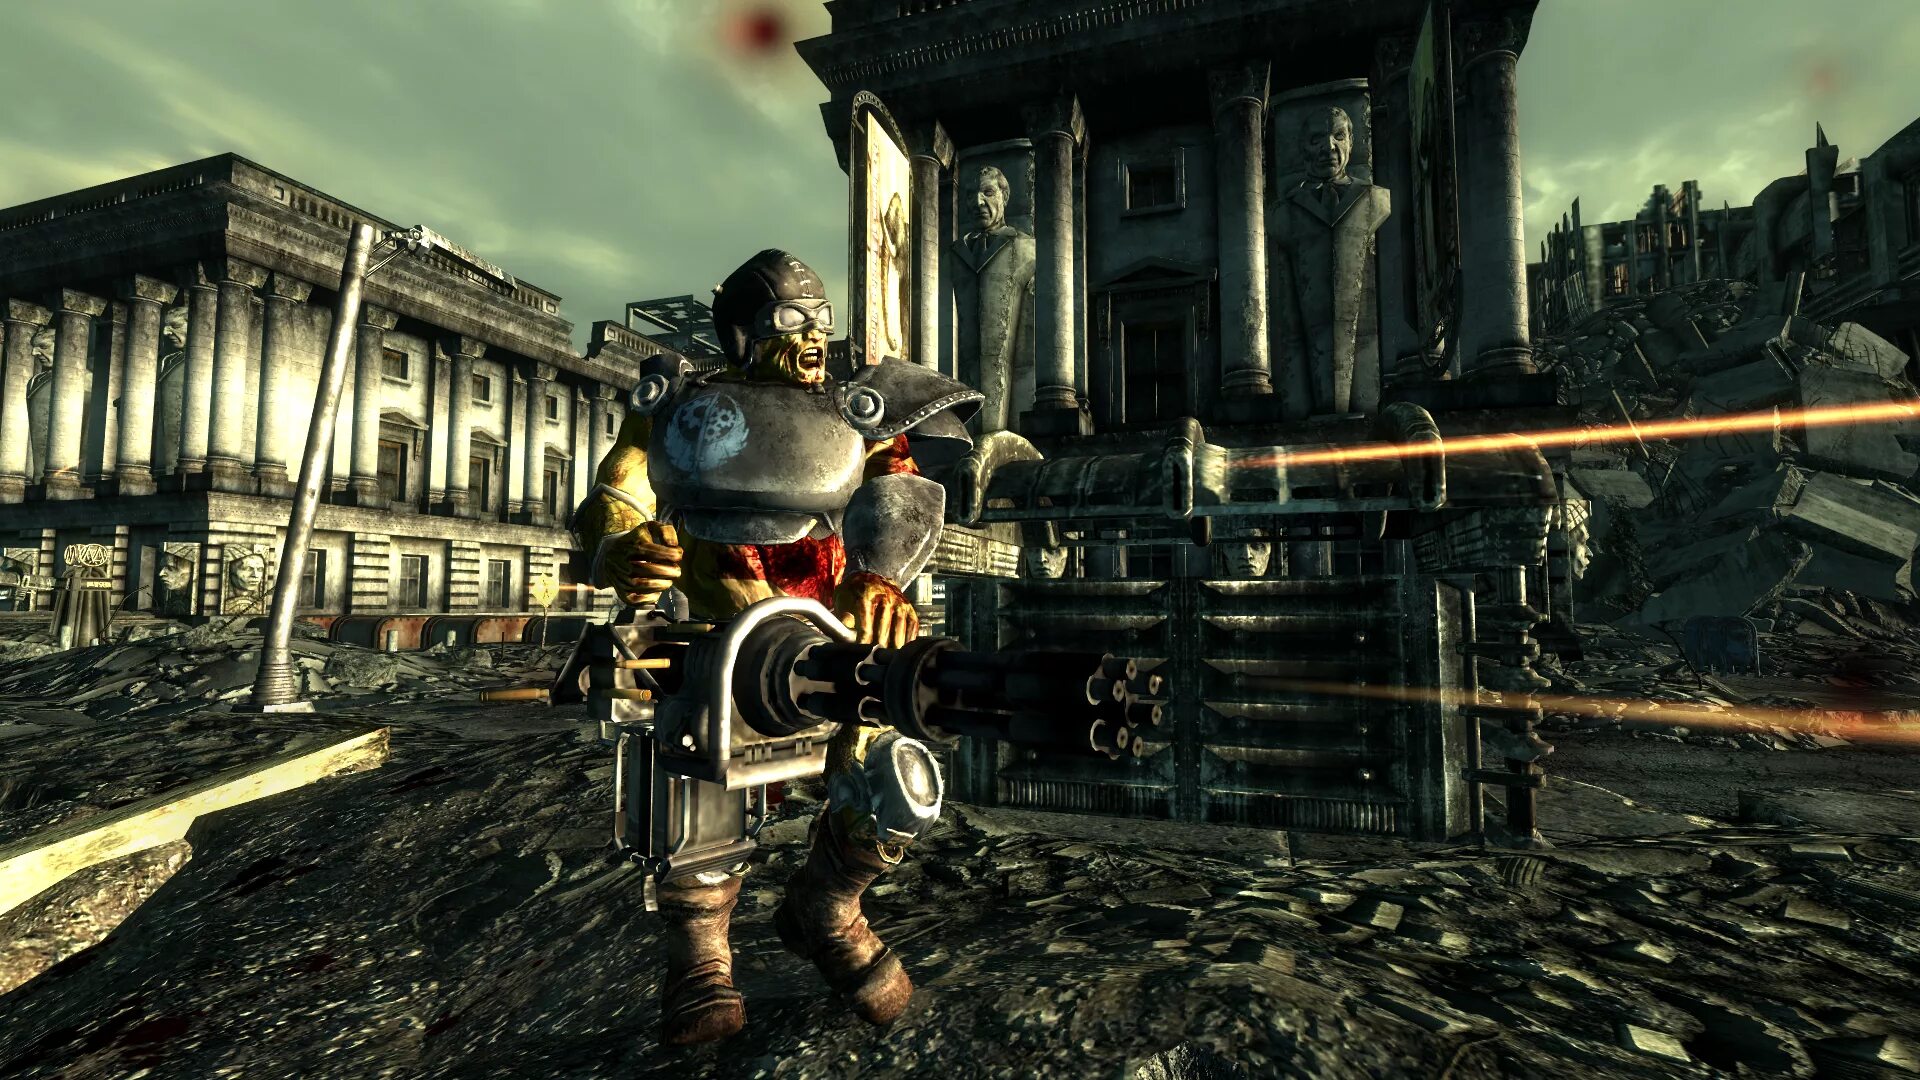 Fallout 3 Brotherhood of Steel. Fallout 3 дополнения. Fallout New Vegas Brotherhood of Steel. Фоллаут 3 ДЛС.